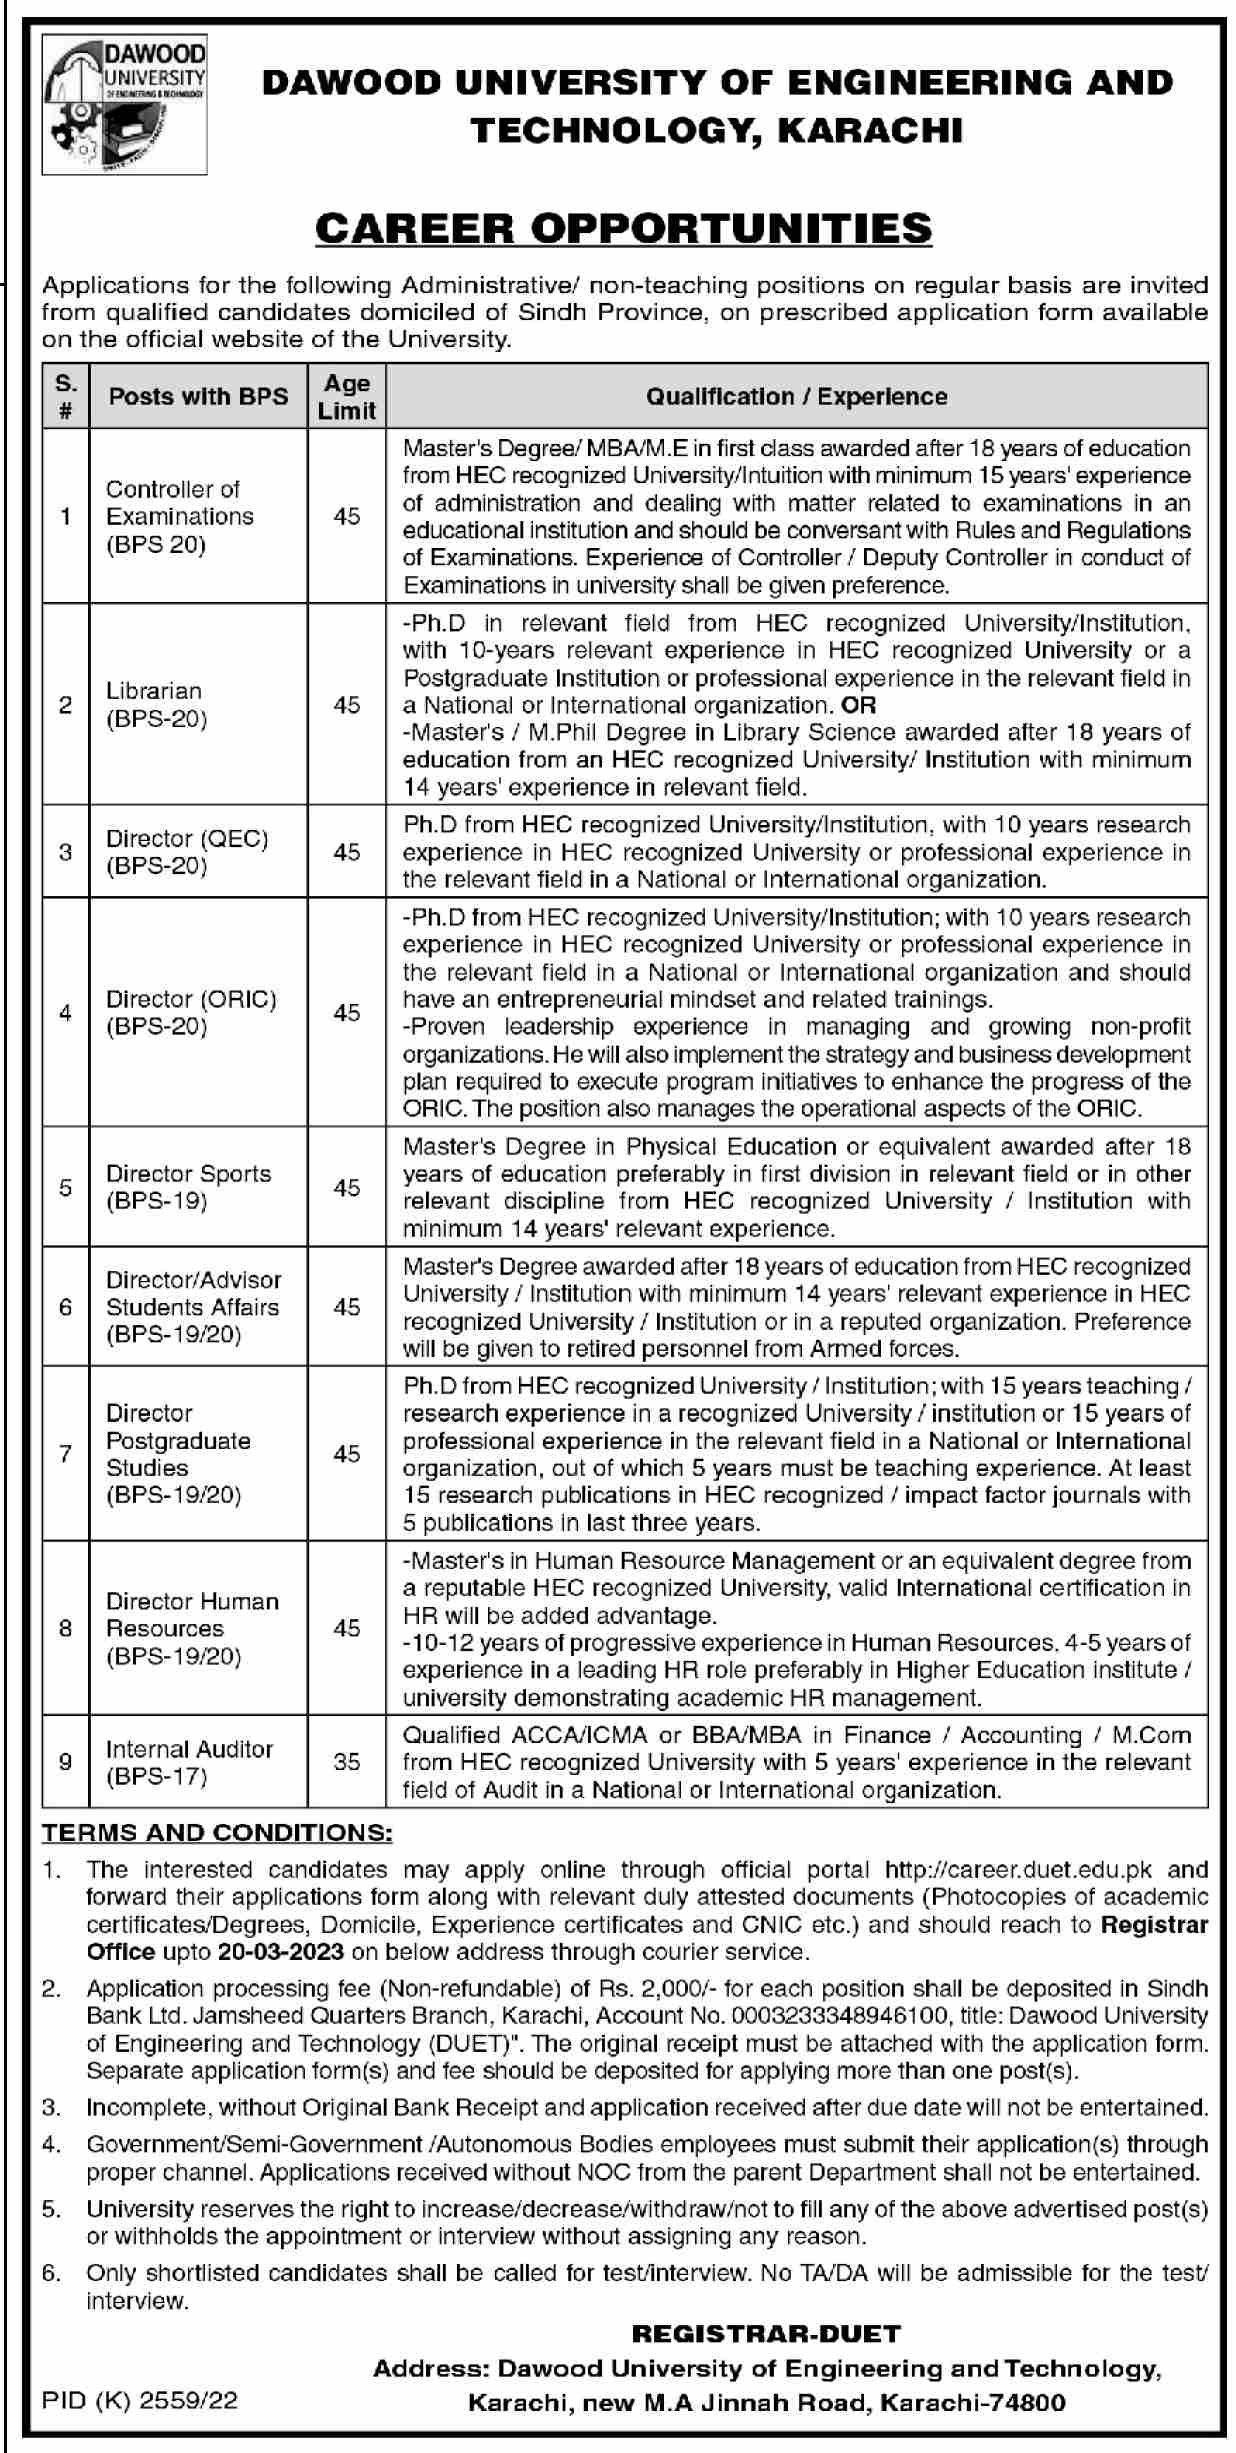 Dawood University Of Engineering and Technology Jobs